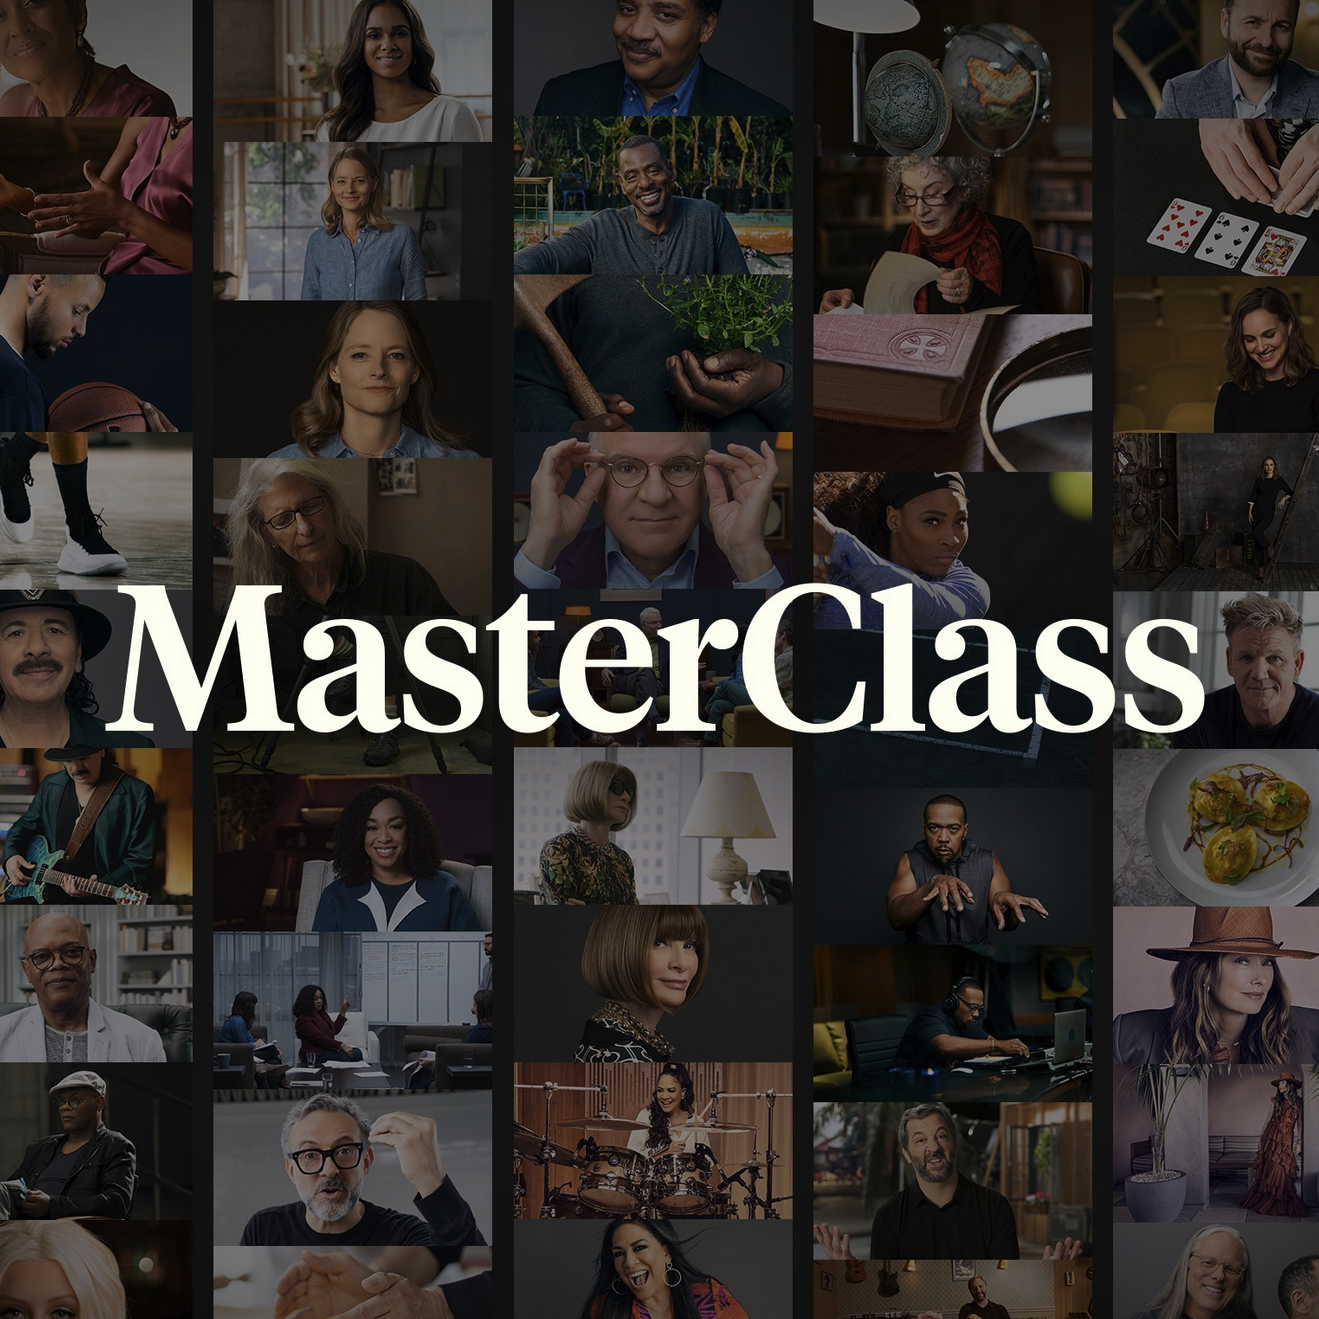 Collage image showcasing various professionals and celebrities from diverse fields as part of the 'MasterClass' series. The central focus is the bold 'MasterClass' logo, surrounded by experts in their crafts, from musicians, chefs, writers, to filmmakers, hinting at the wide range of courses and knowledge available through the platform.